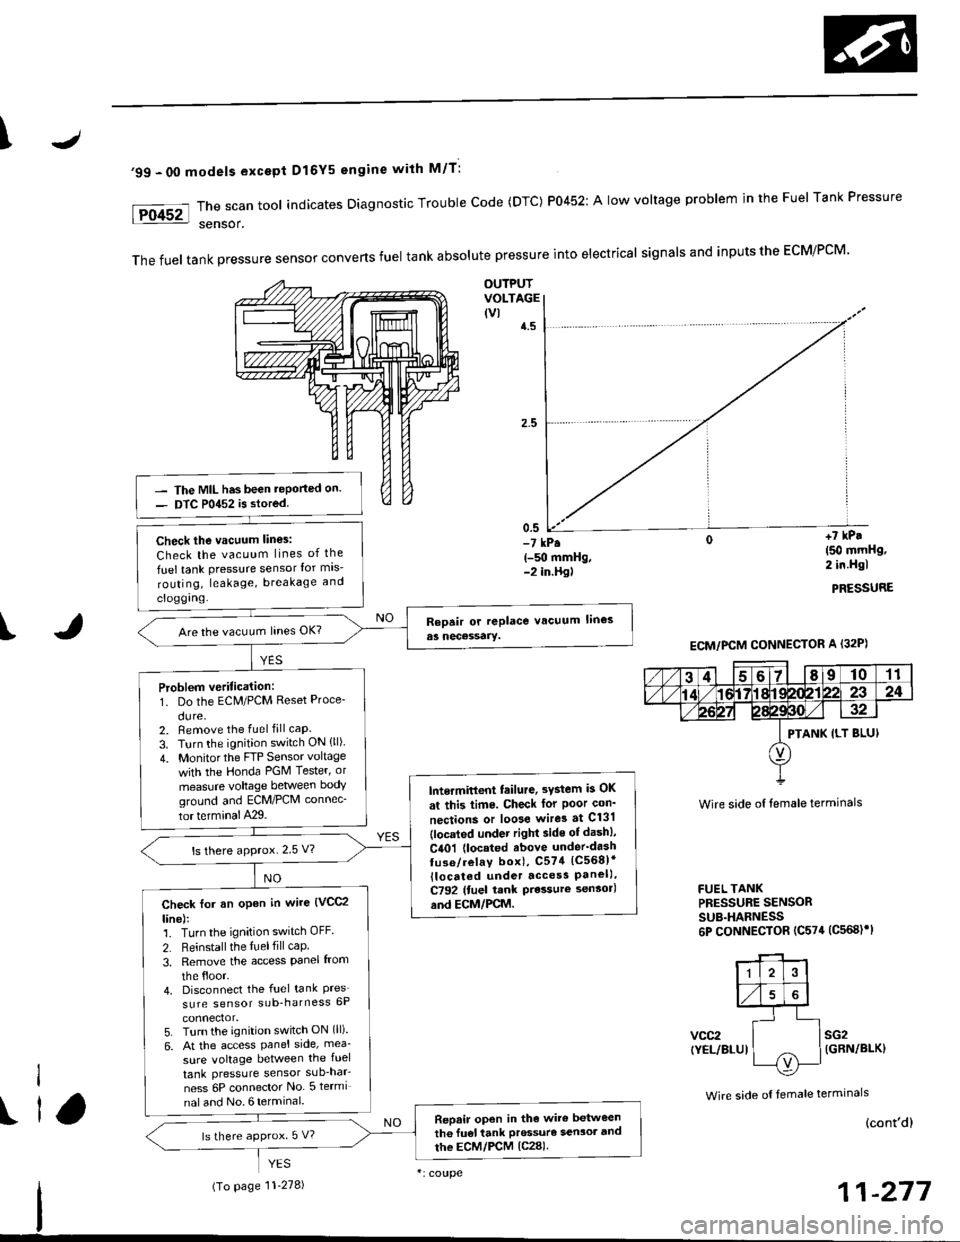 HONDA CIVIC 1997 6.G Owners Guide \
99 - 00 models excepi Dl6Y5 engine with M/T:
The scan tool indicates Diagnostic Trouble Code (DTC) P0452: A low voltage problem in the Fuel Tank Pressure
sensor.
The fuel tank pressure sensor conve